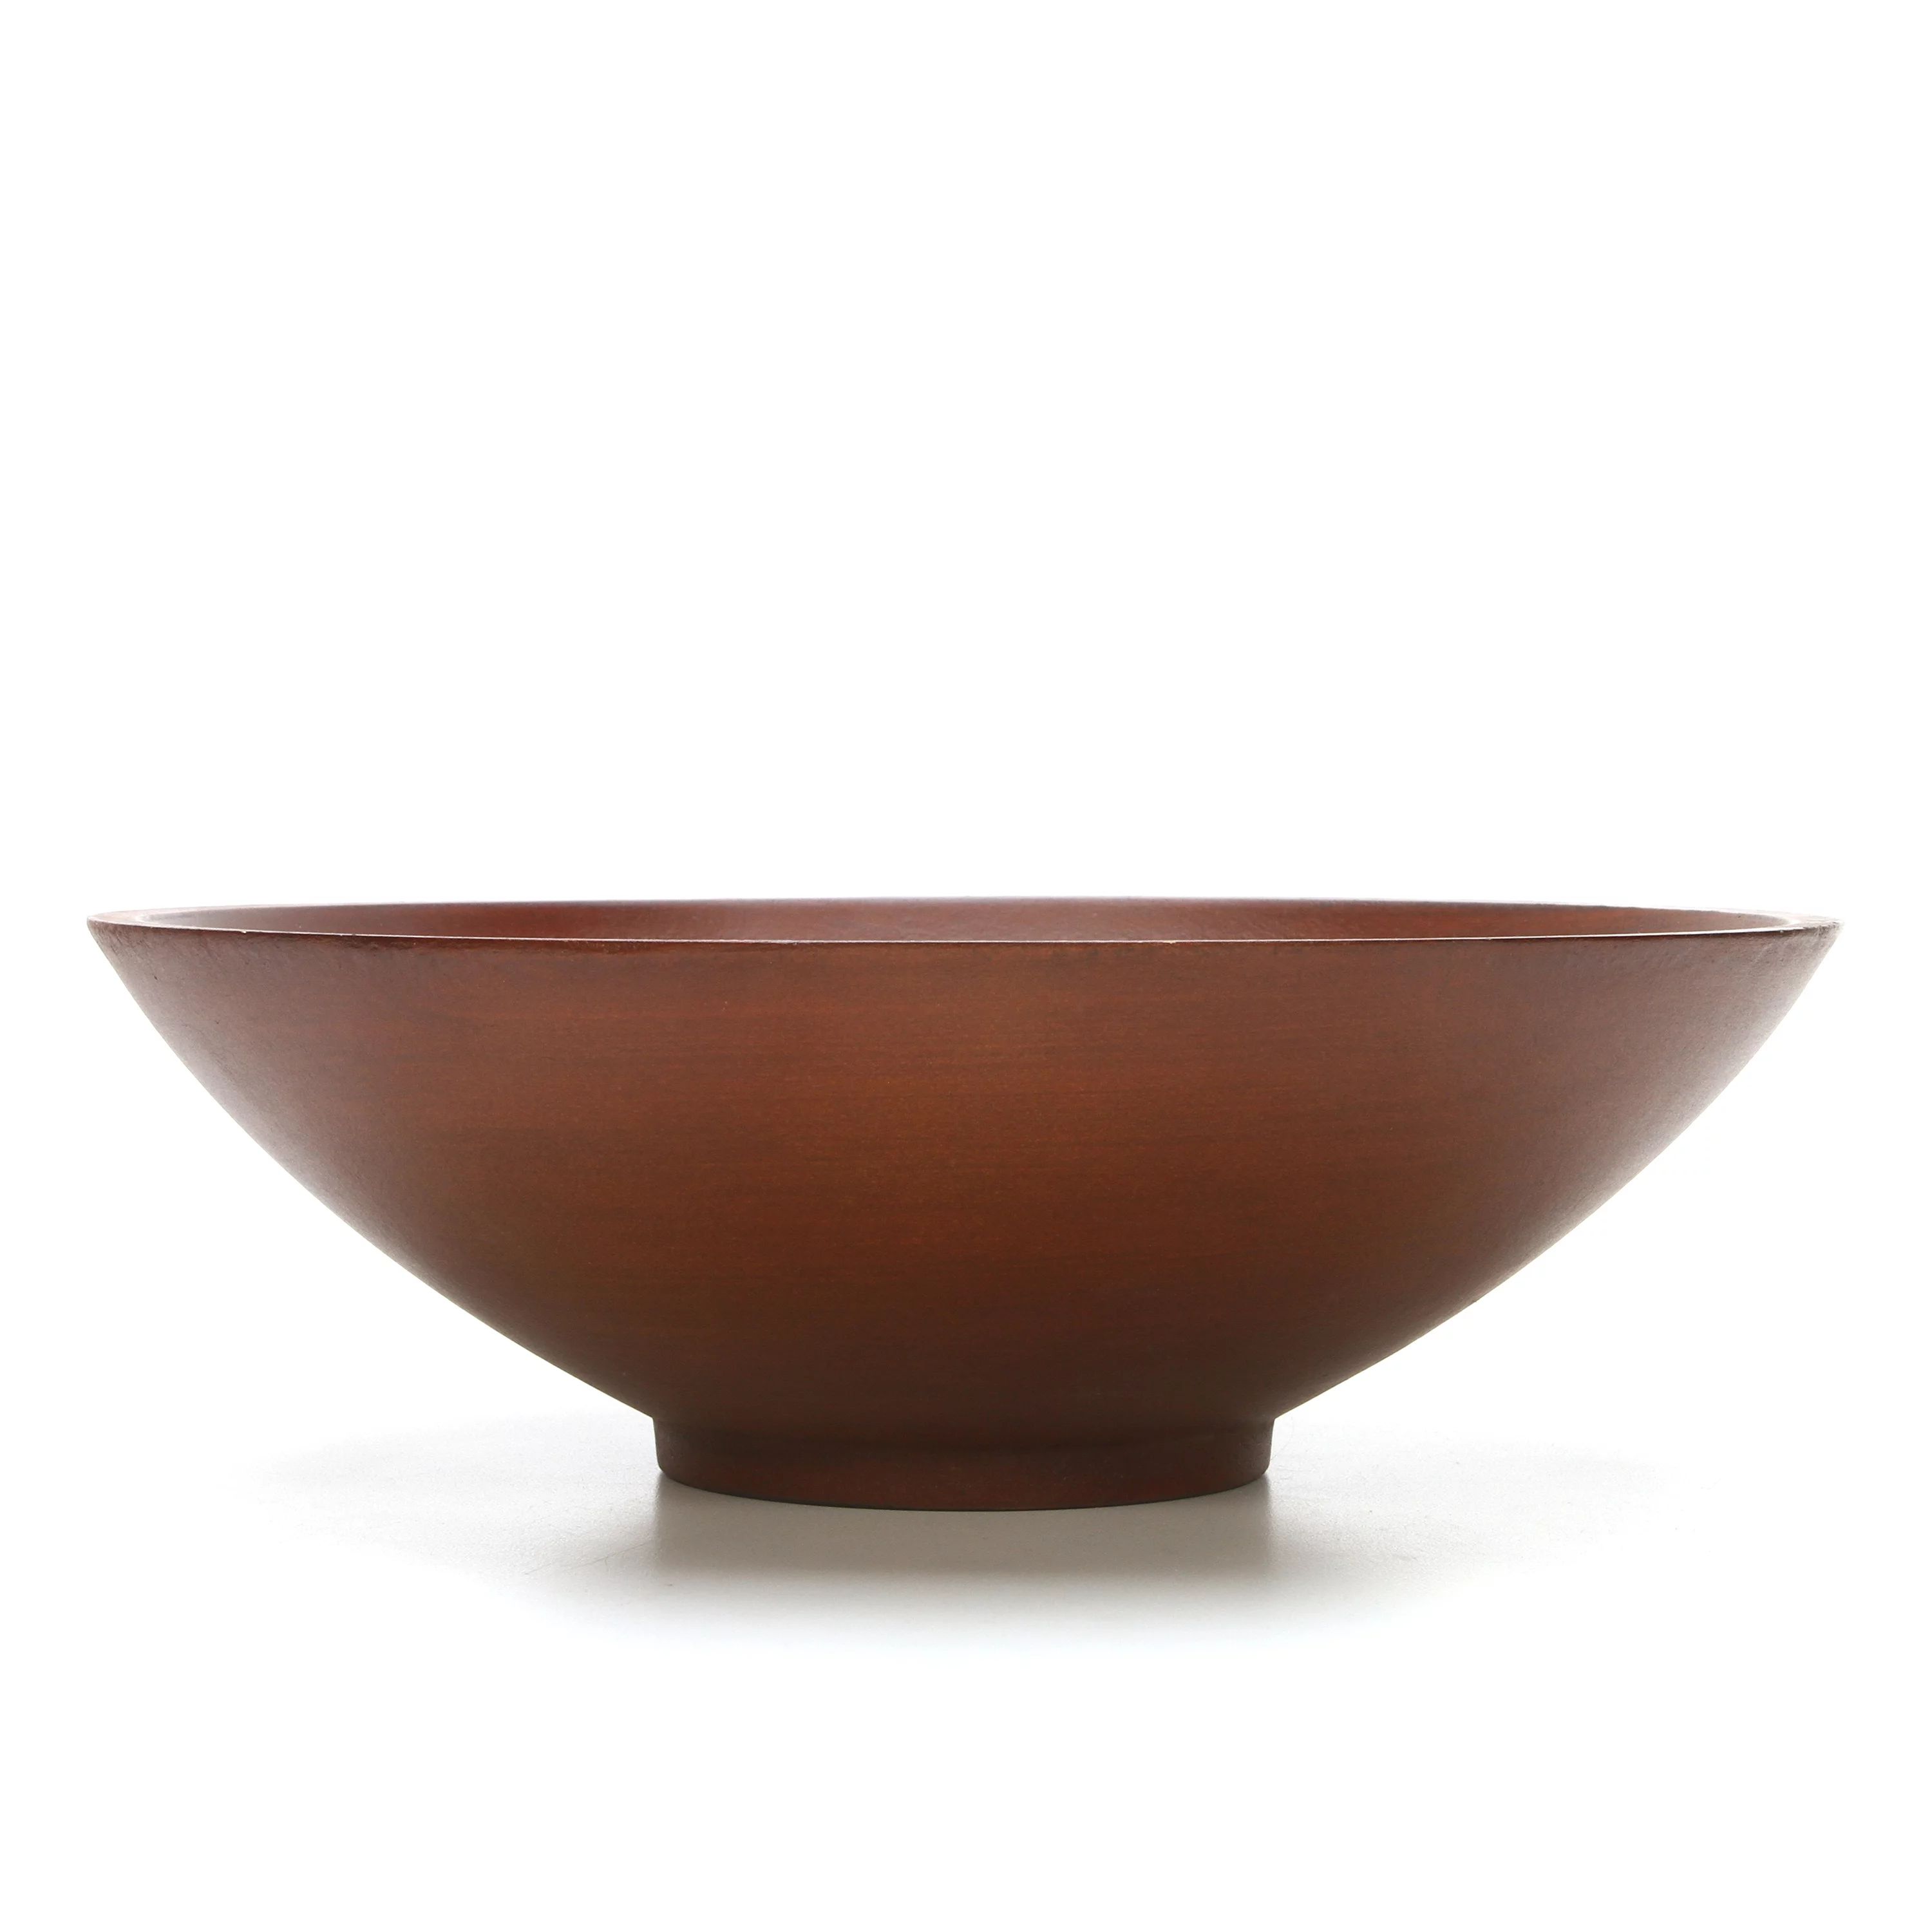 Hosley 11.8 inch Diameter, Wooden Finished Decorative Bowl | Walmart (US)